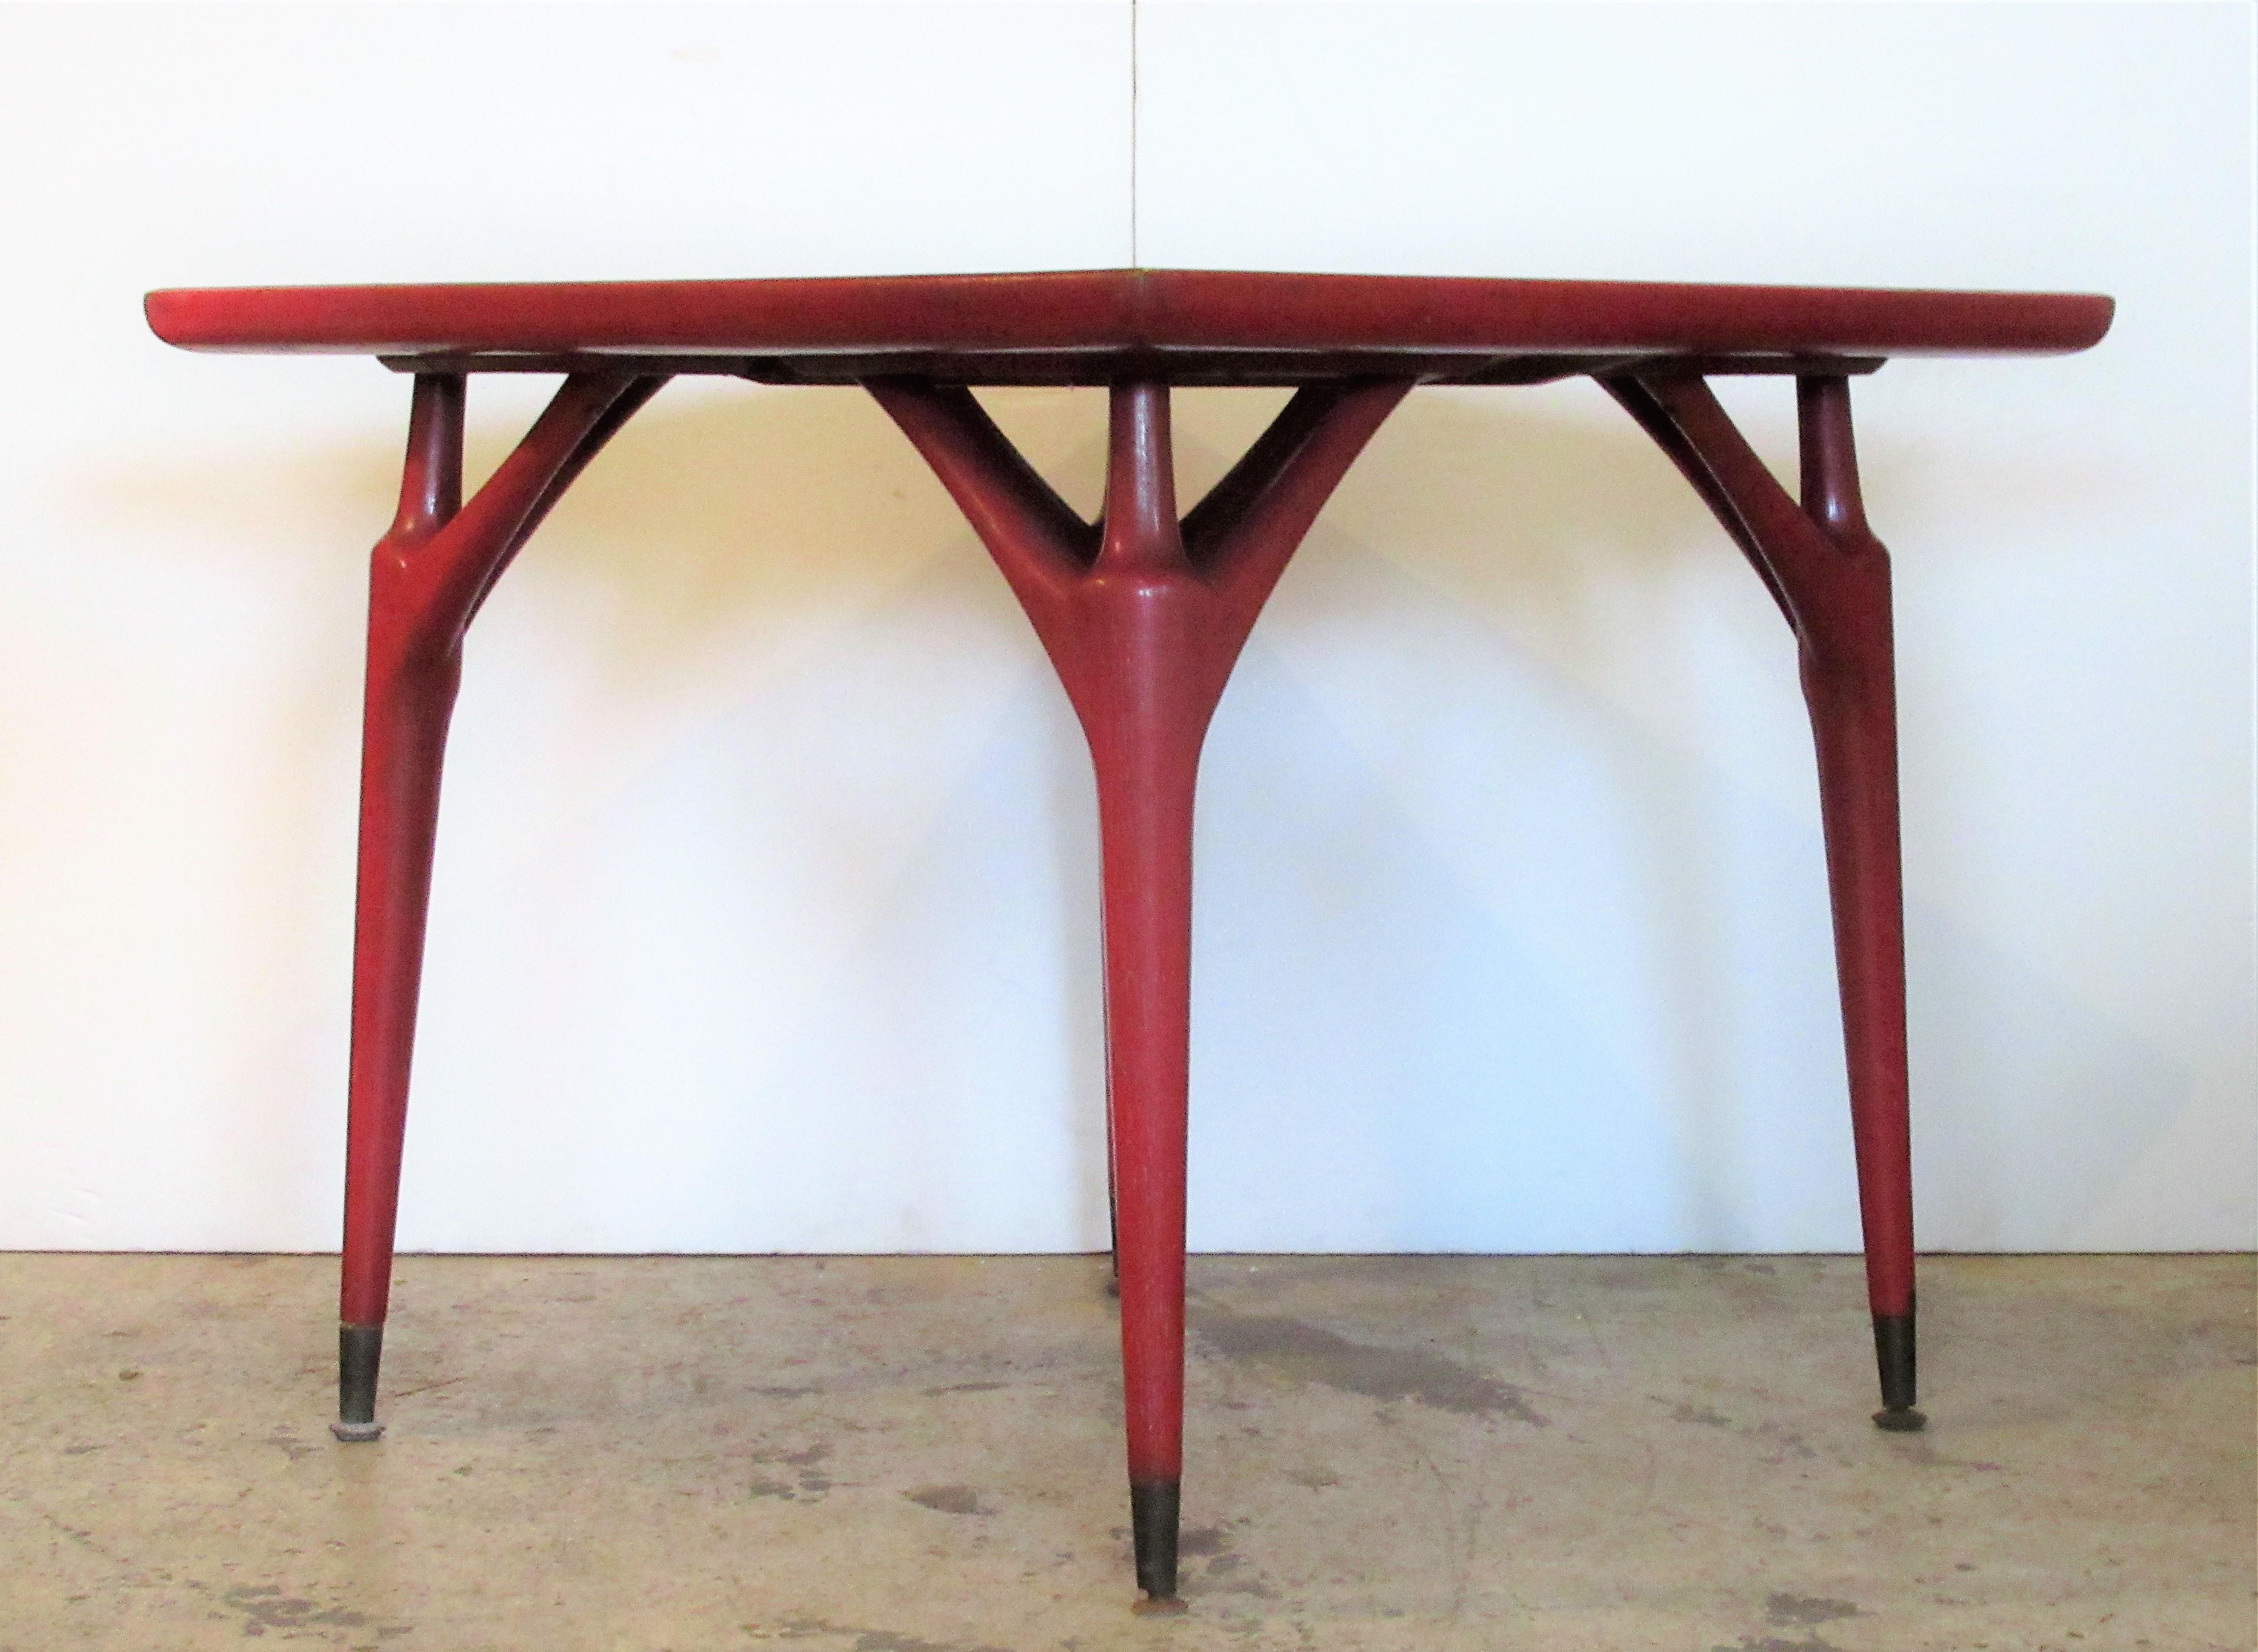 Cafe or small dining table by Jack Van der Molen with a good looking sculptural form and what appears to be the original old deep coral red paint glazed finish that beautifully brings out the bold grain of the oak wood. Circa 1950. See all pictures